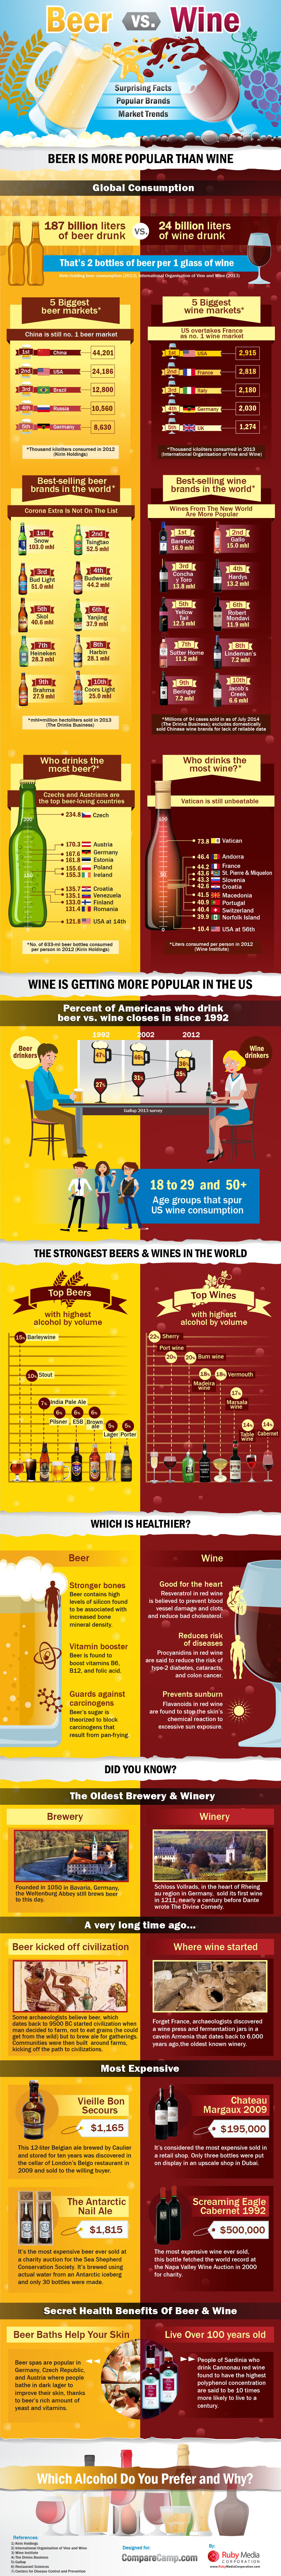 Beer And Wine: Compare The Most Popular Brands & Countries That Drink The Most